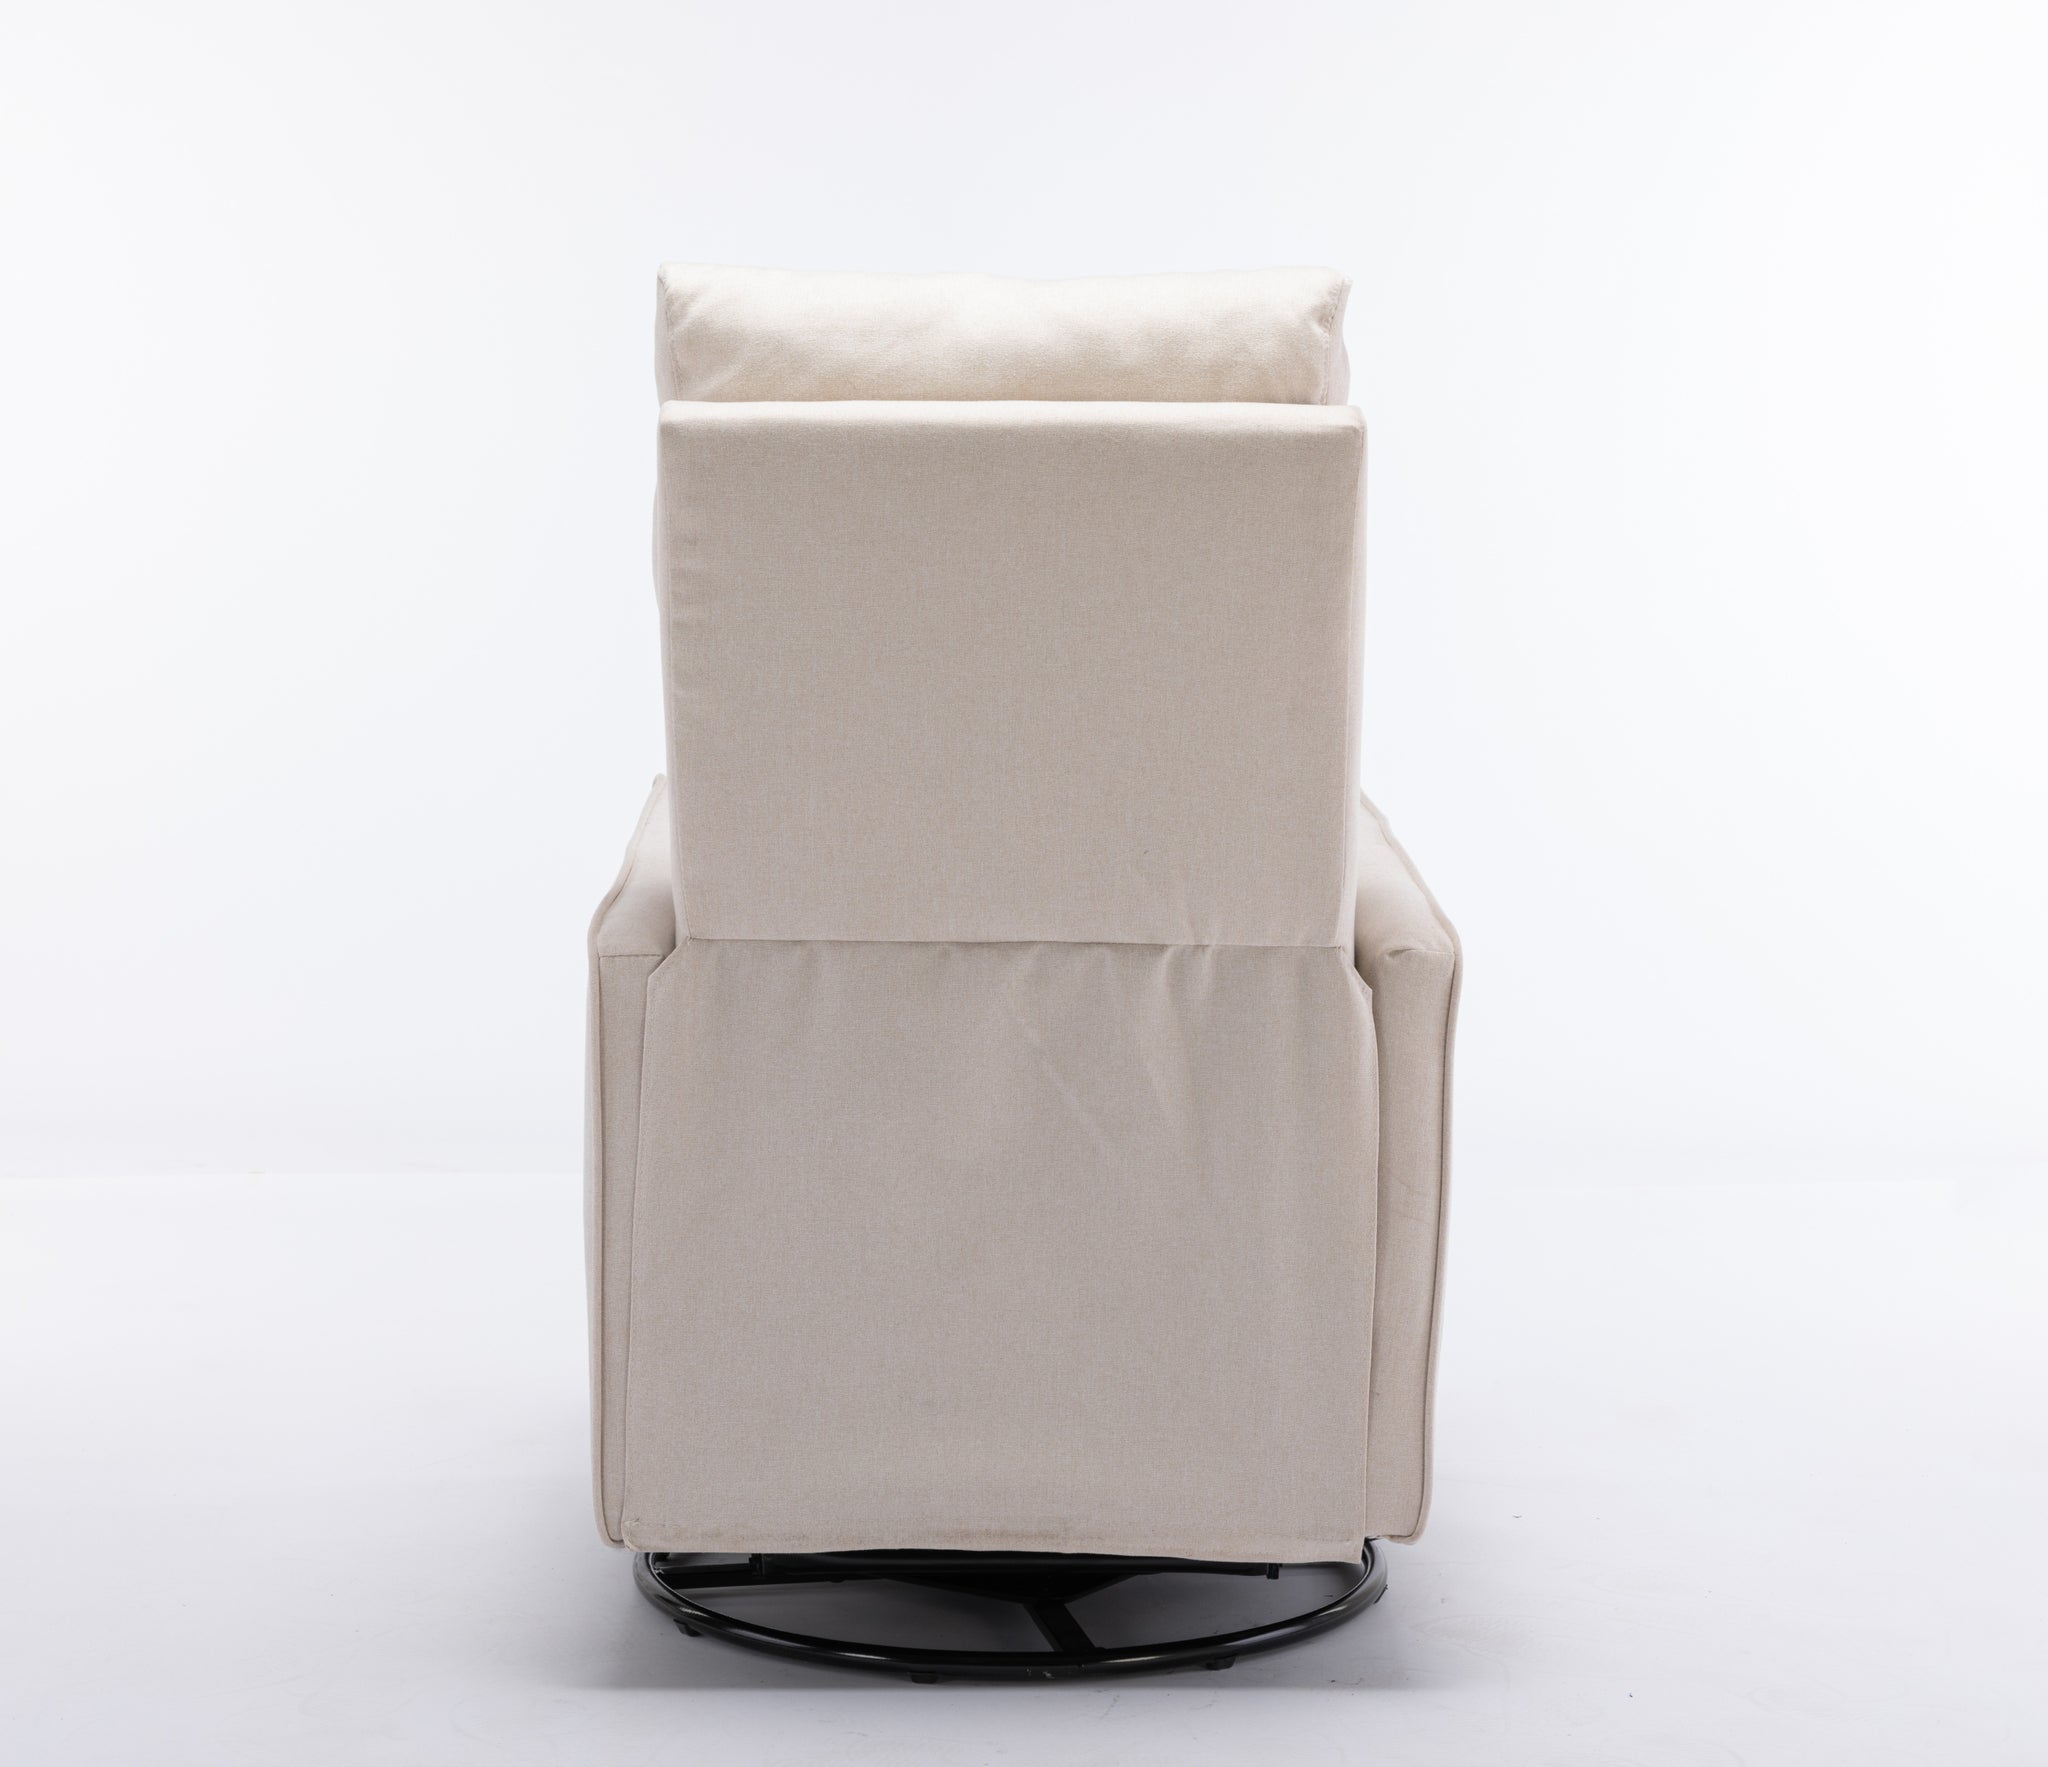 038 Cotton Linen Fabric Swivel Rocking Chair Glider beige-cotton-manual-handle-metal-primary living